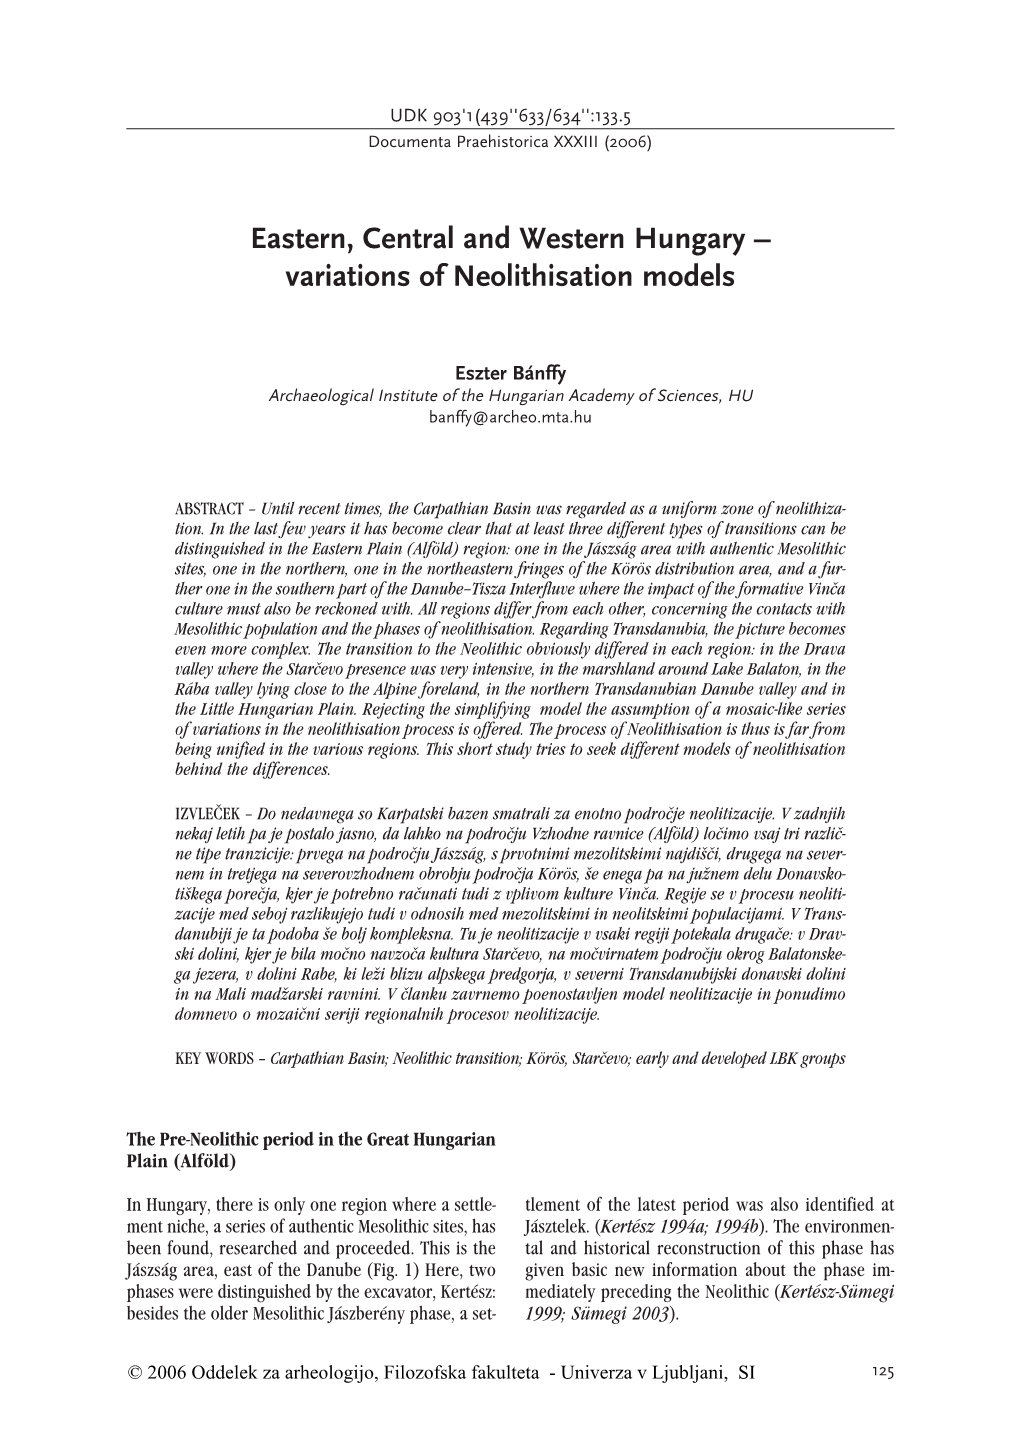 Eastern, Central and Western Hungary – Variations of Neolithisation Models